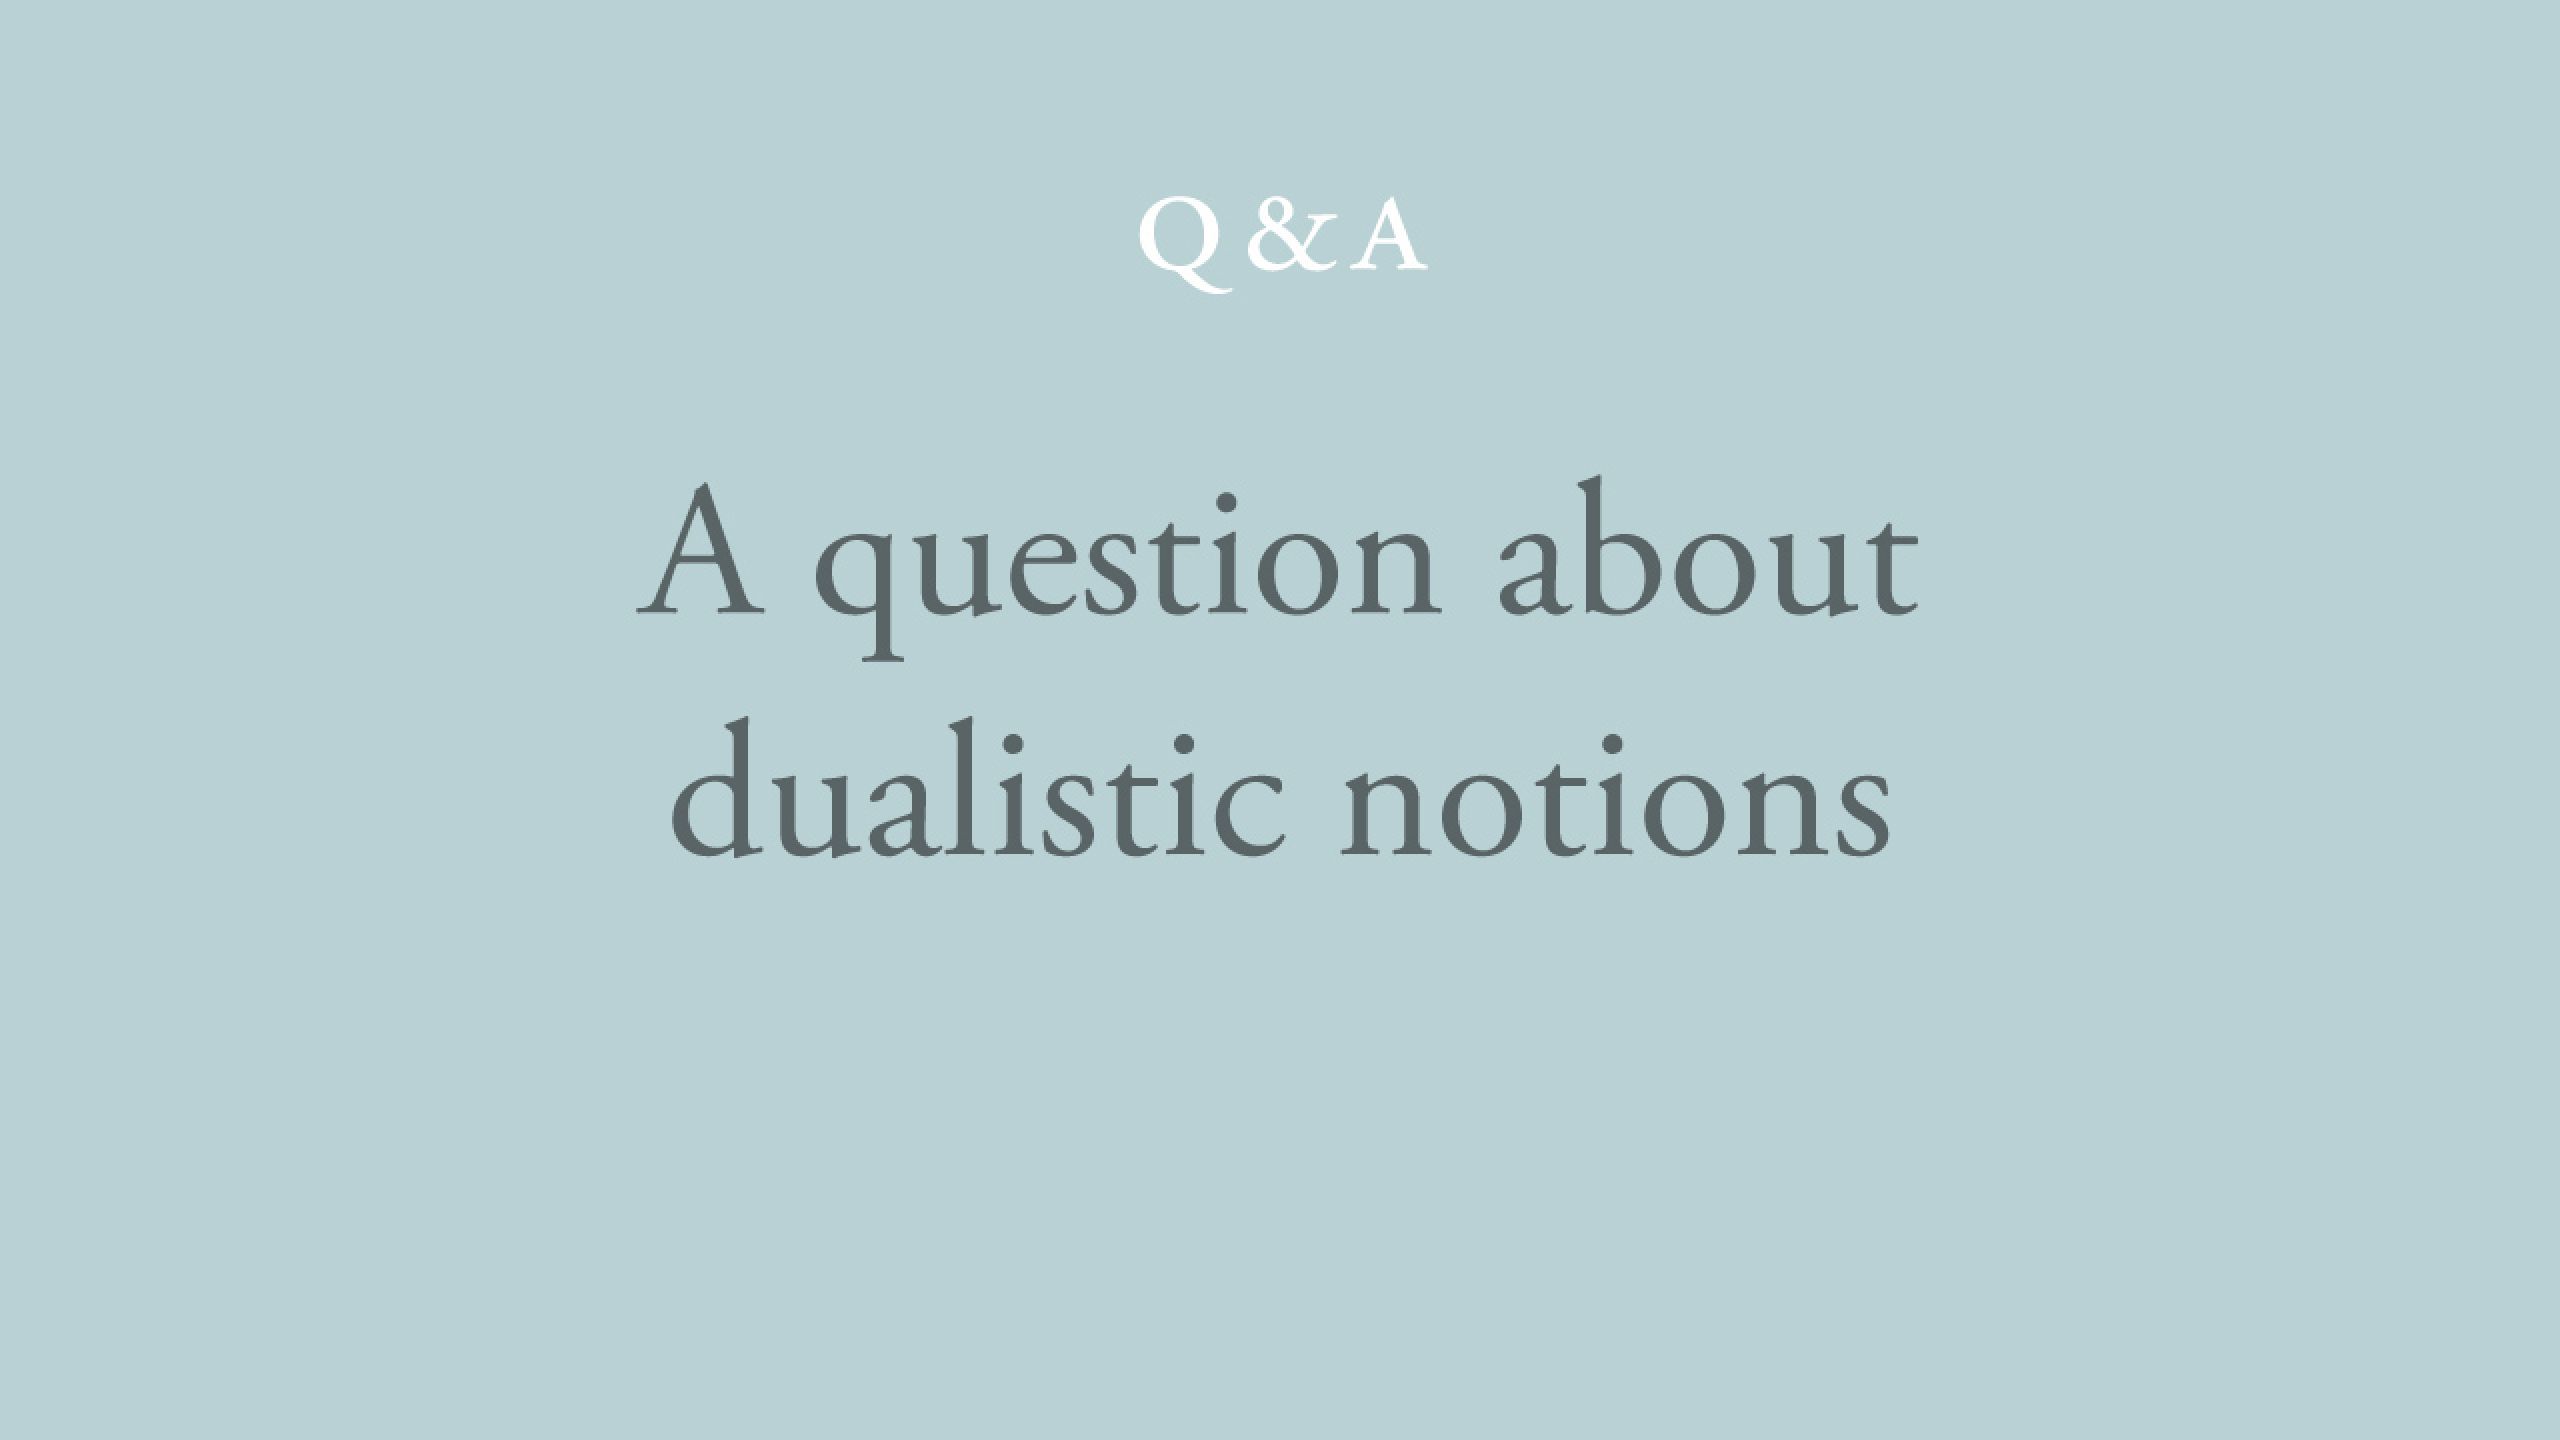 Why use dualistic notions to share the non-dual understanding?